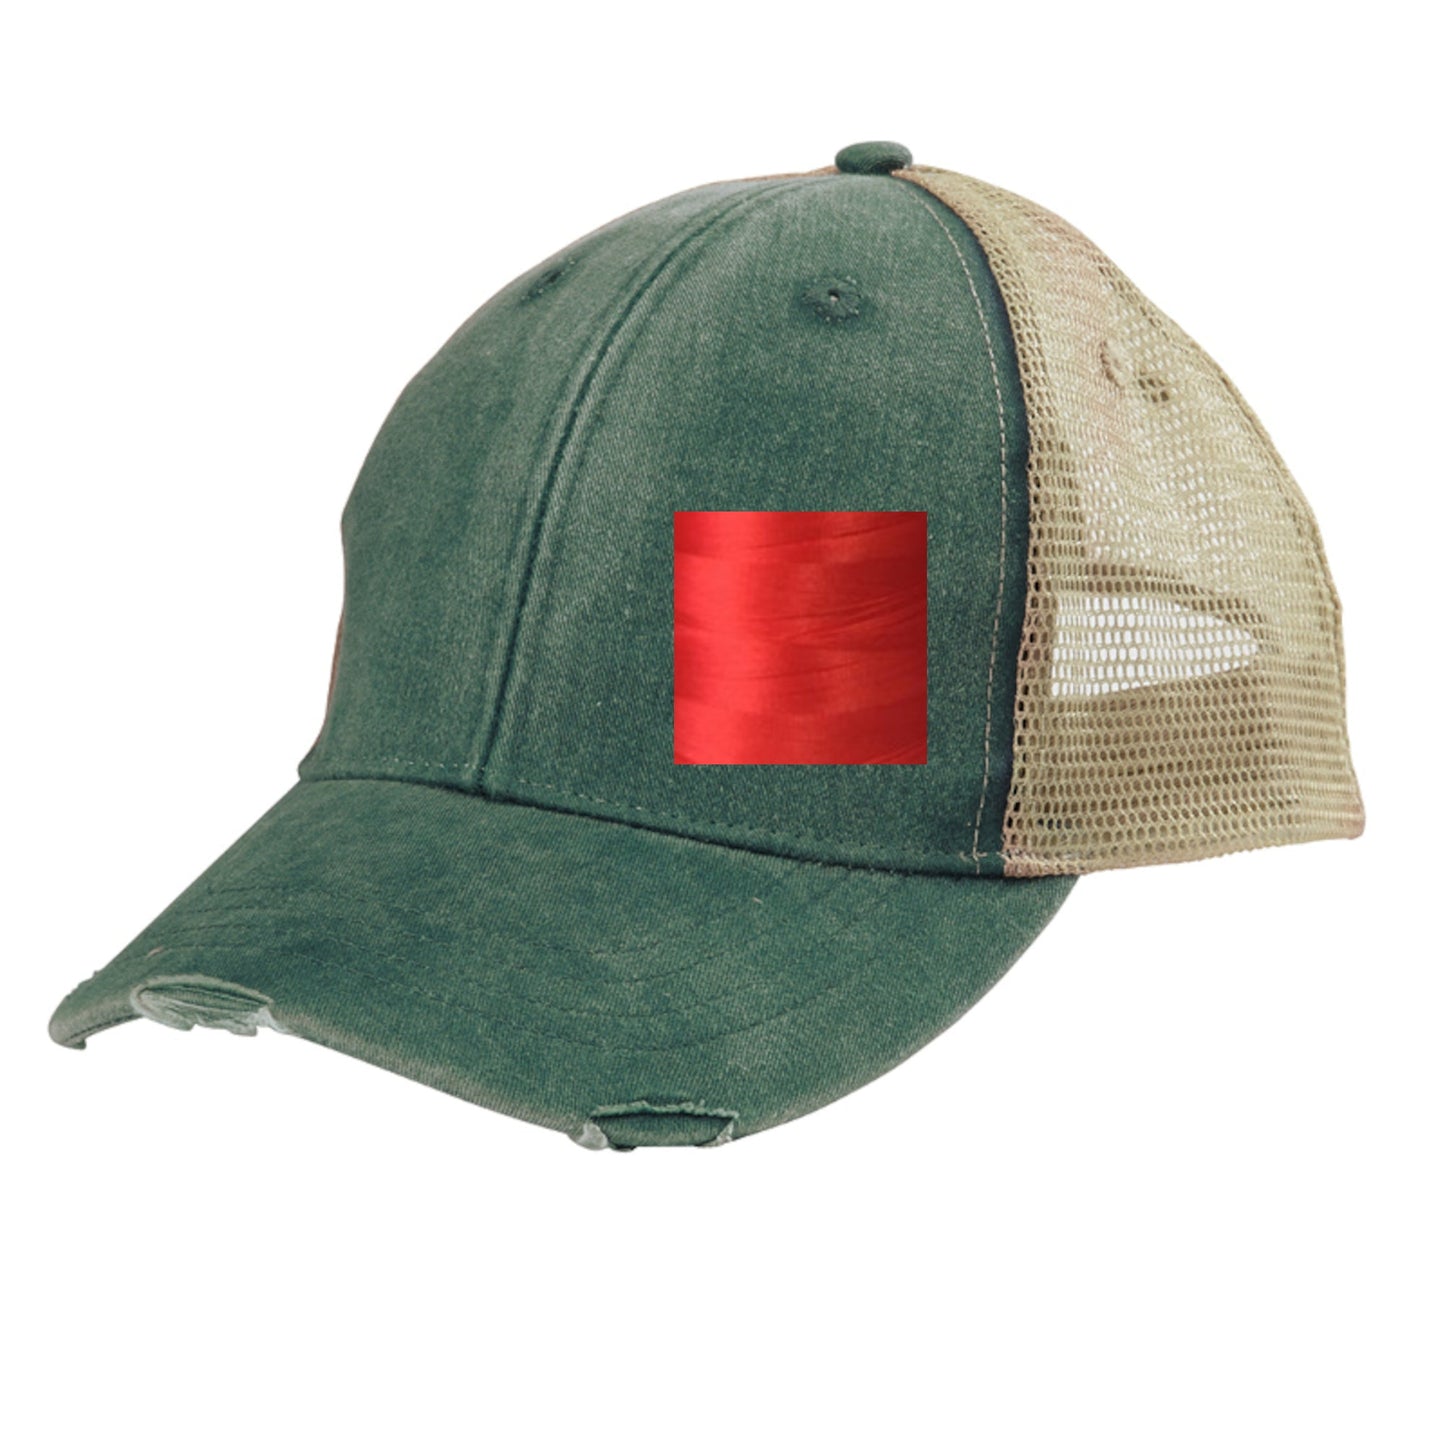 Missouri Hat | Distressed Snapback Trucker | state cap | many color choices